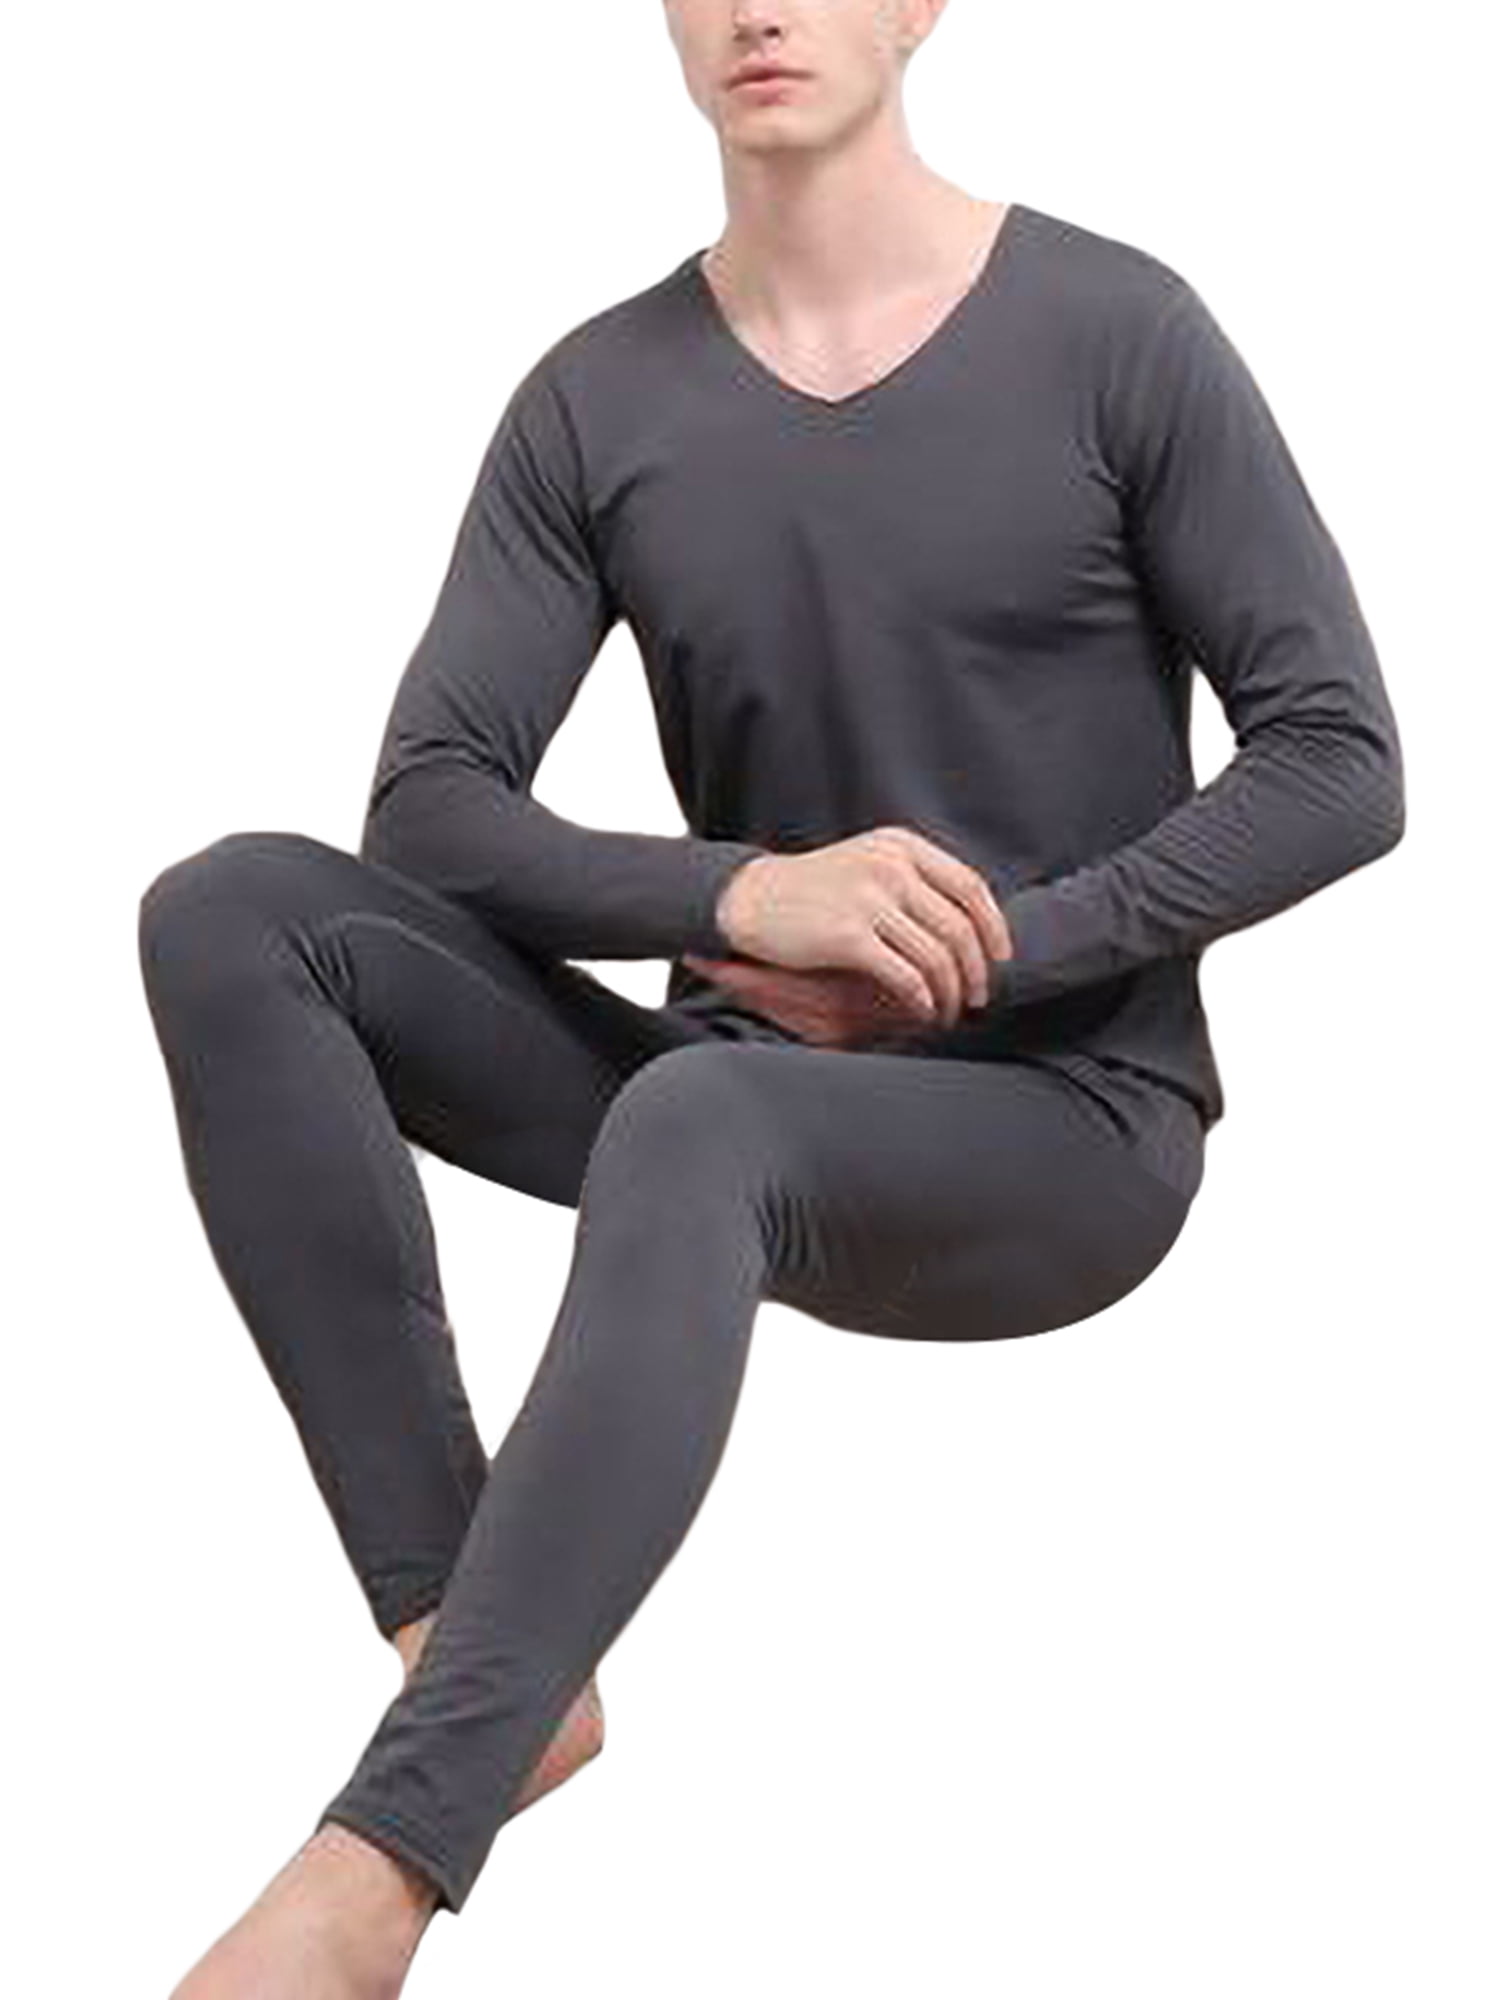 Men's Thermal Top and Bottom Set Underwear Long Johns Base Layer with Soft Fleece Lined… 